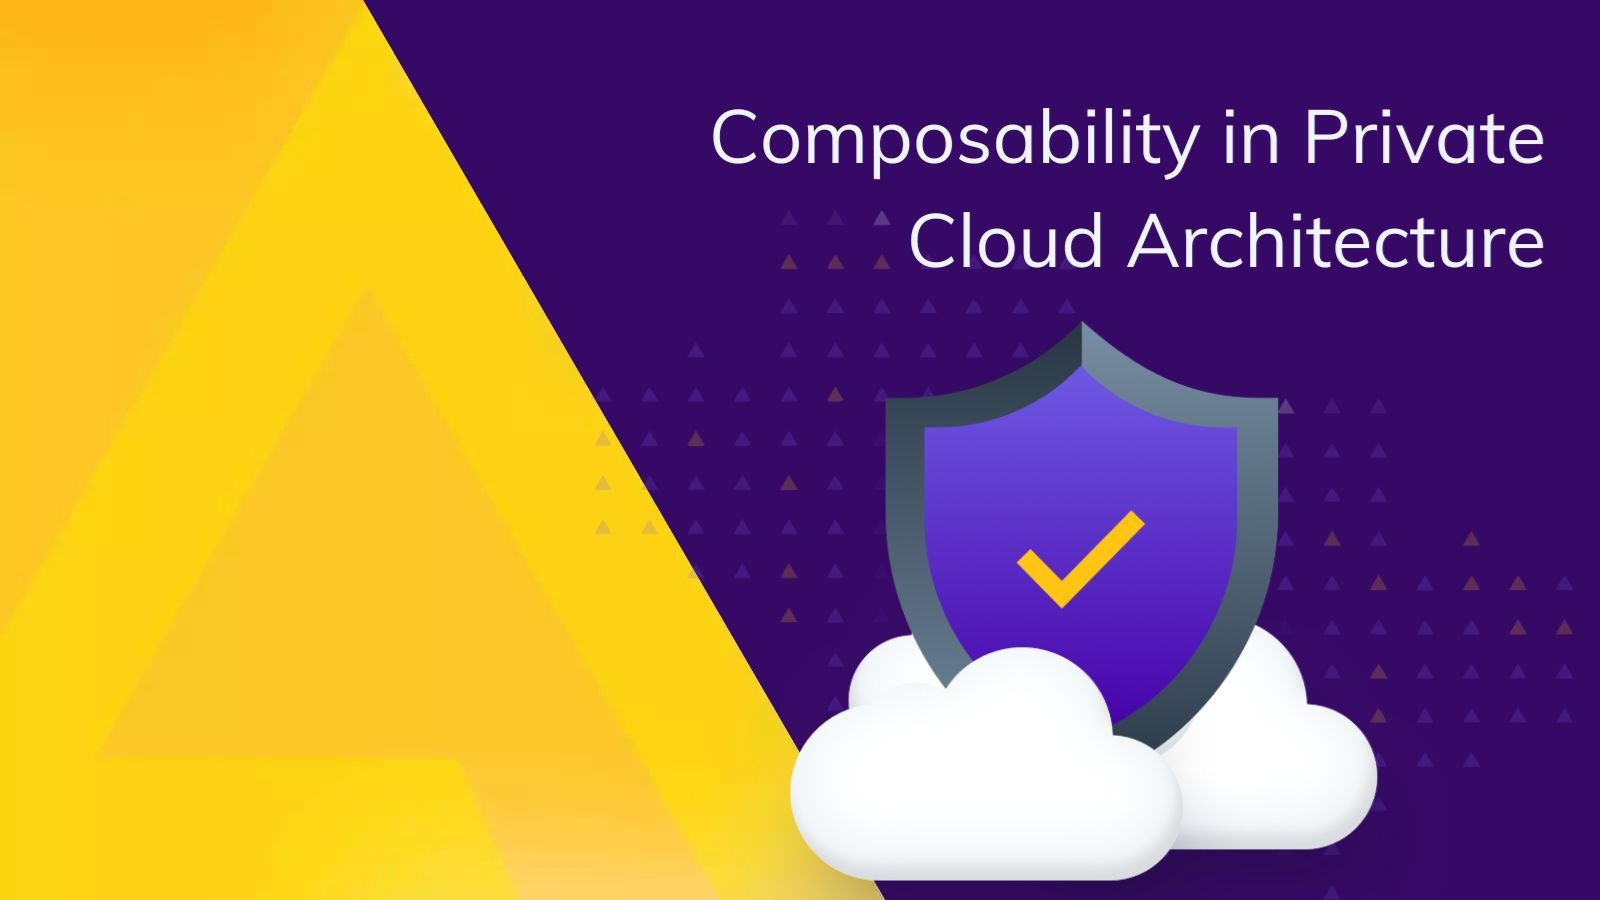 Composability in Private Cloud Architecture